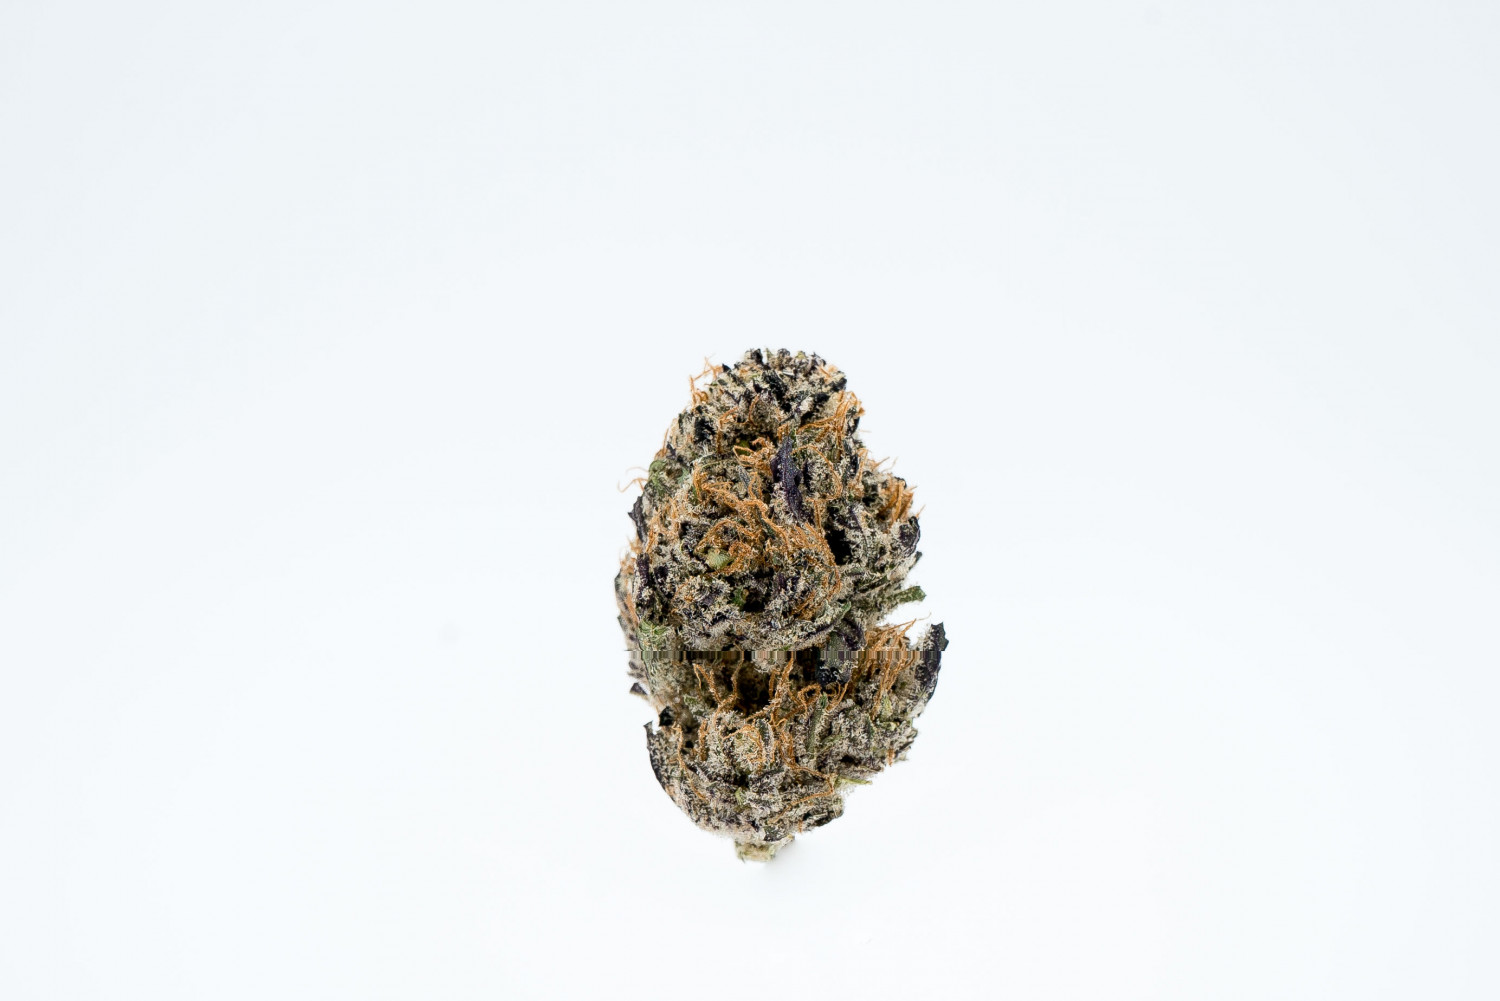 DJ Short Blueberry From Rosebud Growers Is Classically Fruity And Loud